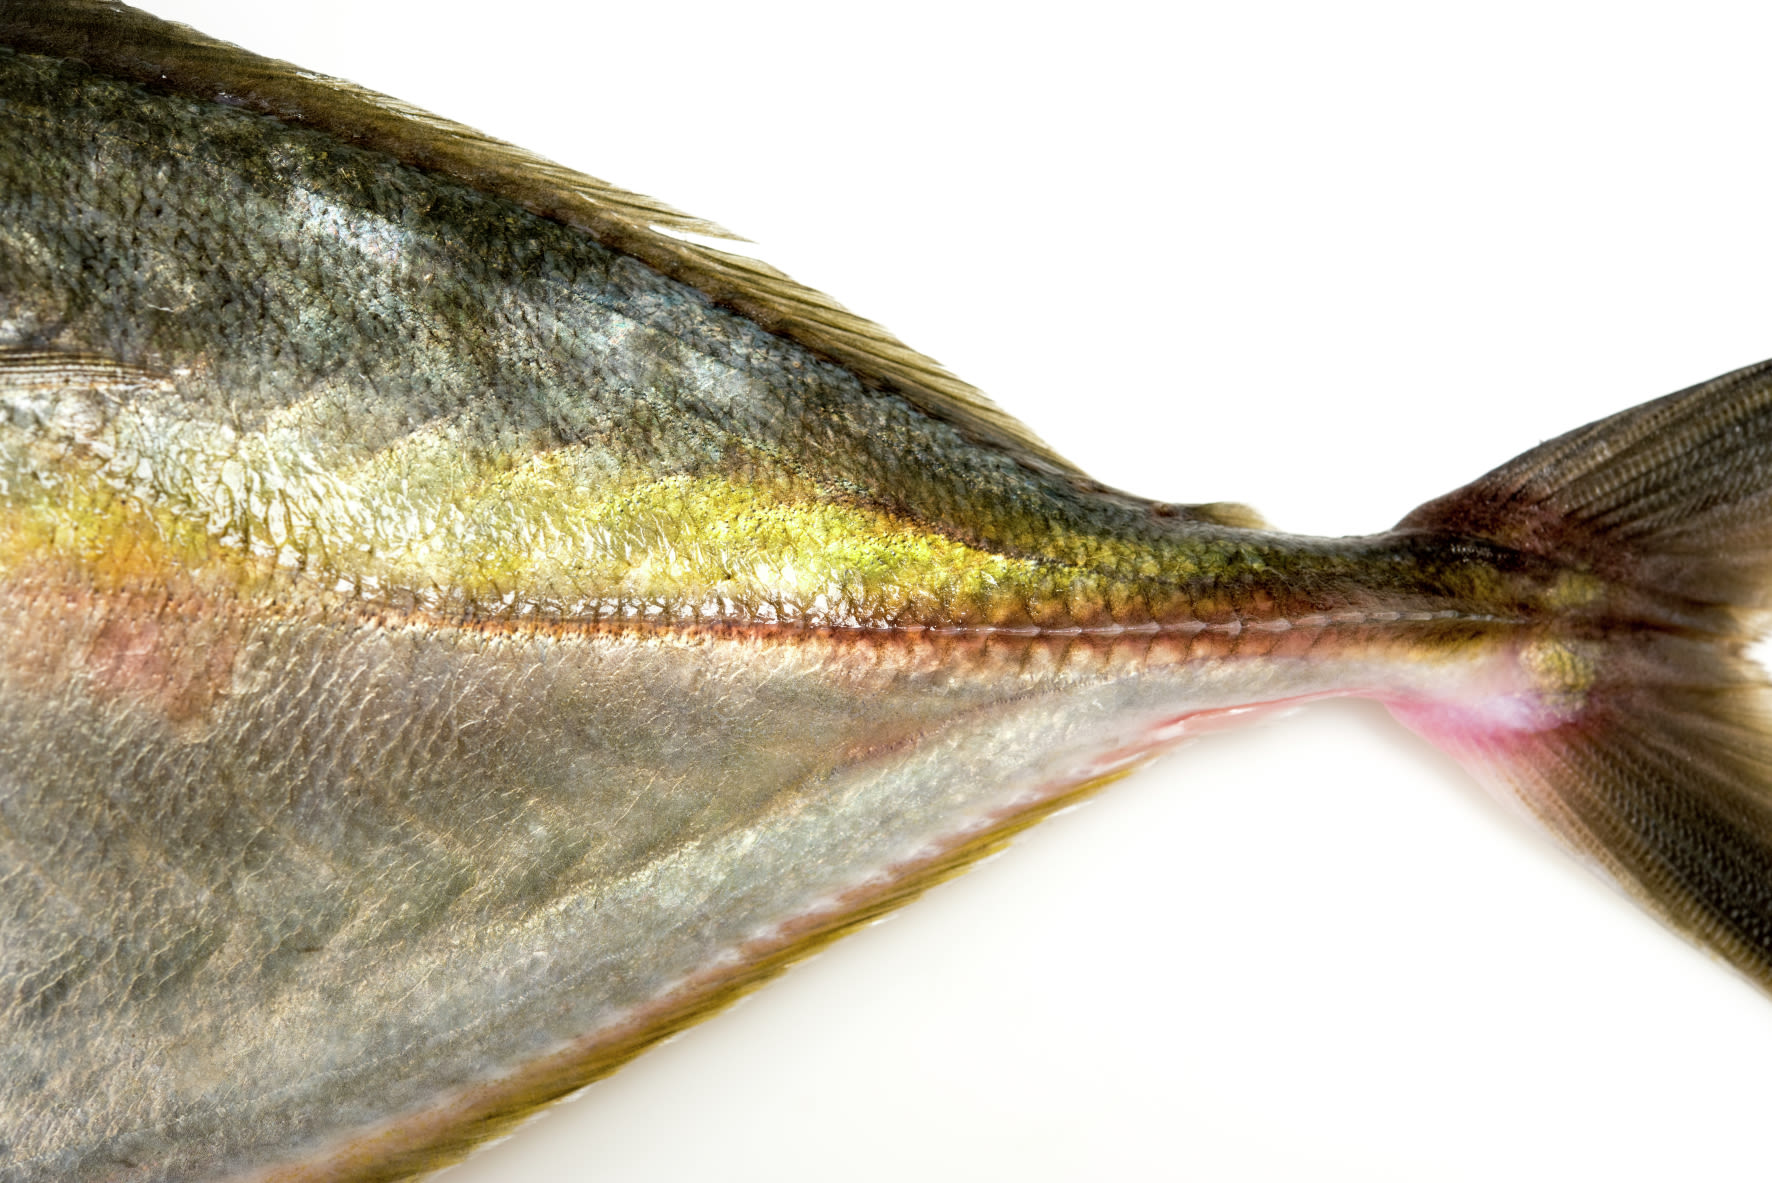 Evaluating new species for aquaculture: New Zealand silver trevally 